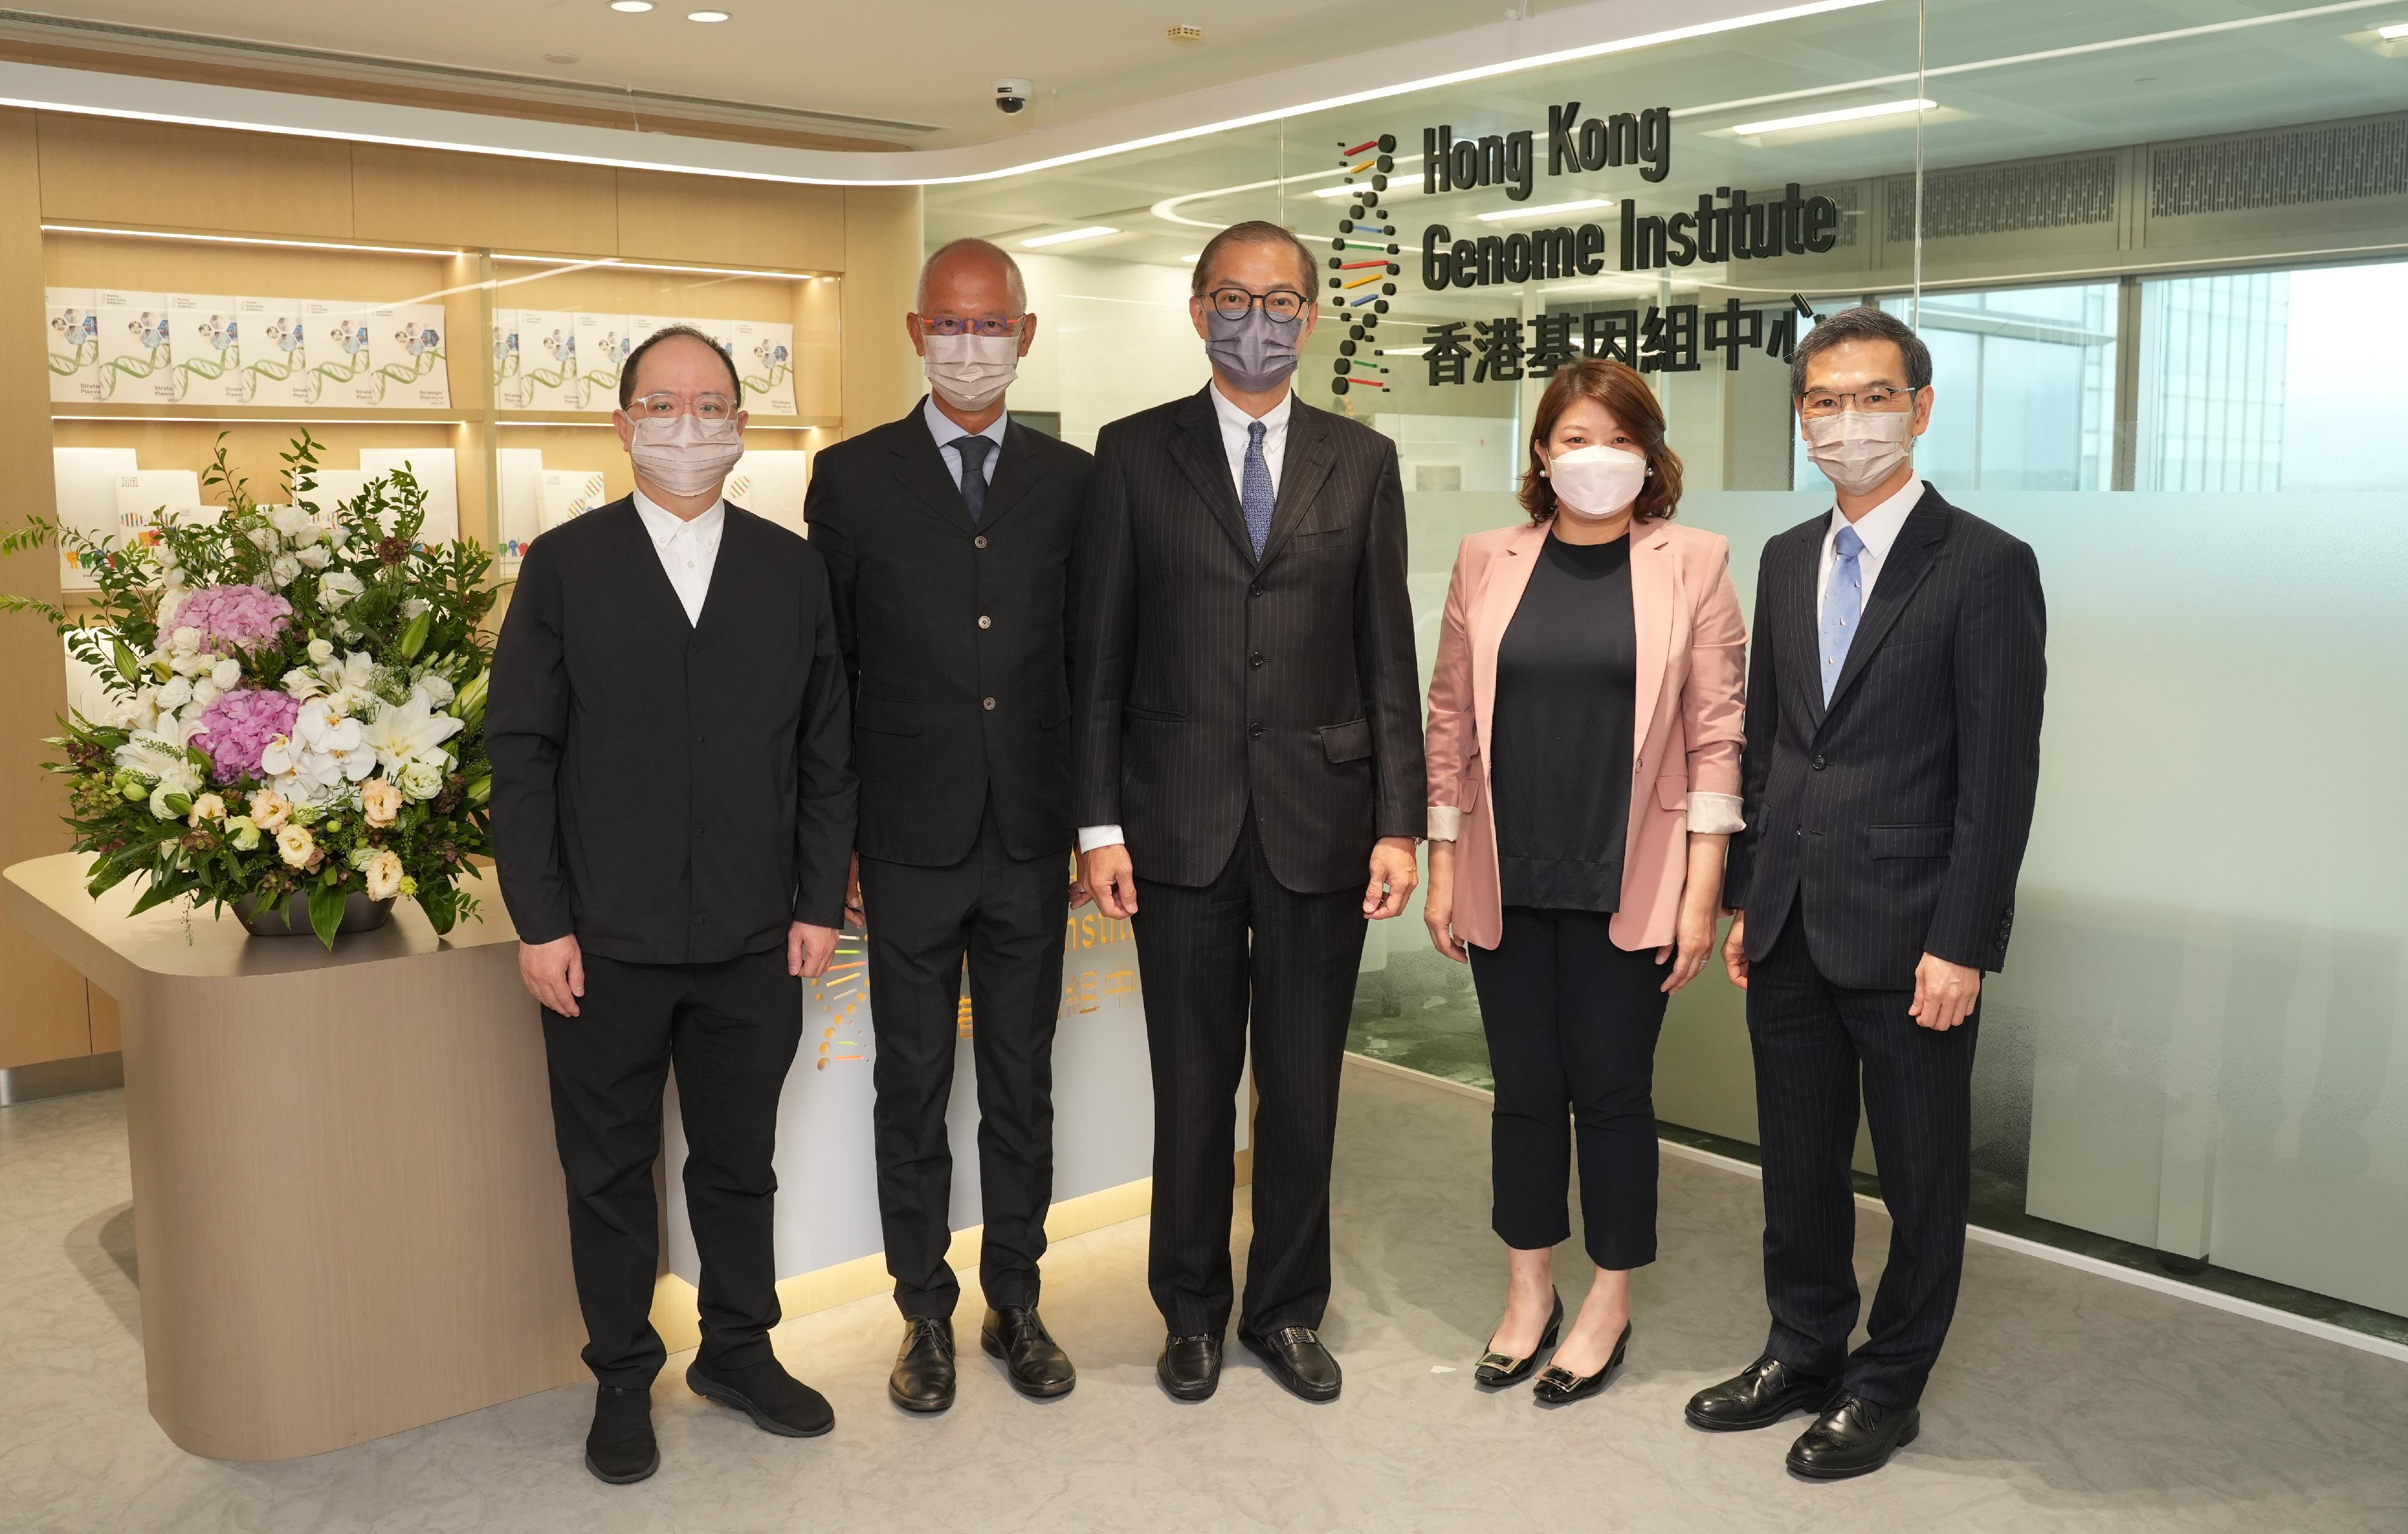 The Secretary for Health, Professor Lo Chung-mau (centre), and the Under Secretary for Health, Dr Libby Lee (second right), today (August 9) visited the Hong Kong Genome Institute (HKGI) in the company of the Chairperson of the HKGI, Mr Philip Tsai (second left); the Deputy Chairperson of the HKGI, Professor Raymond Liang (first left); and the Chief Executive Officer of the HKGI, Dr Lo Su-vui (first right).